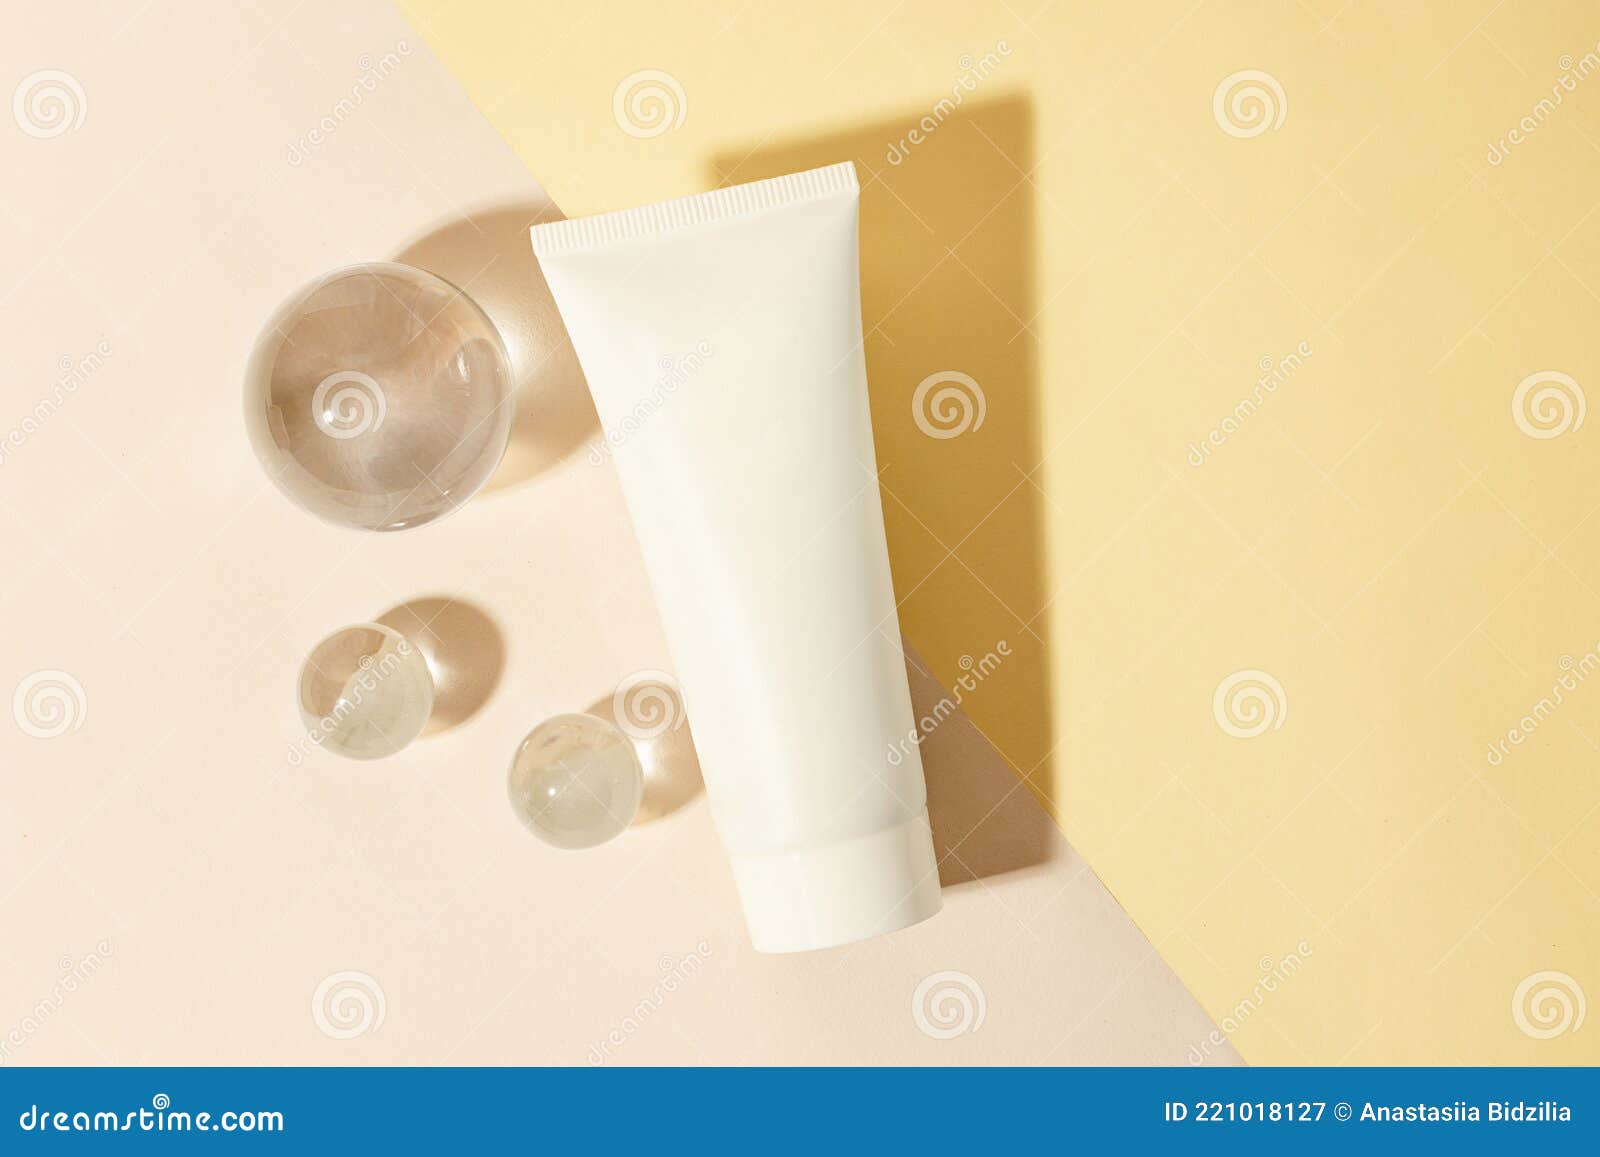 top view of the blank cosmetics tube on the dual pastel background.glass sphers near it,concept of the cleanness and clarity.